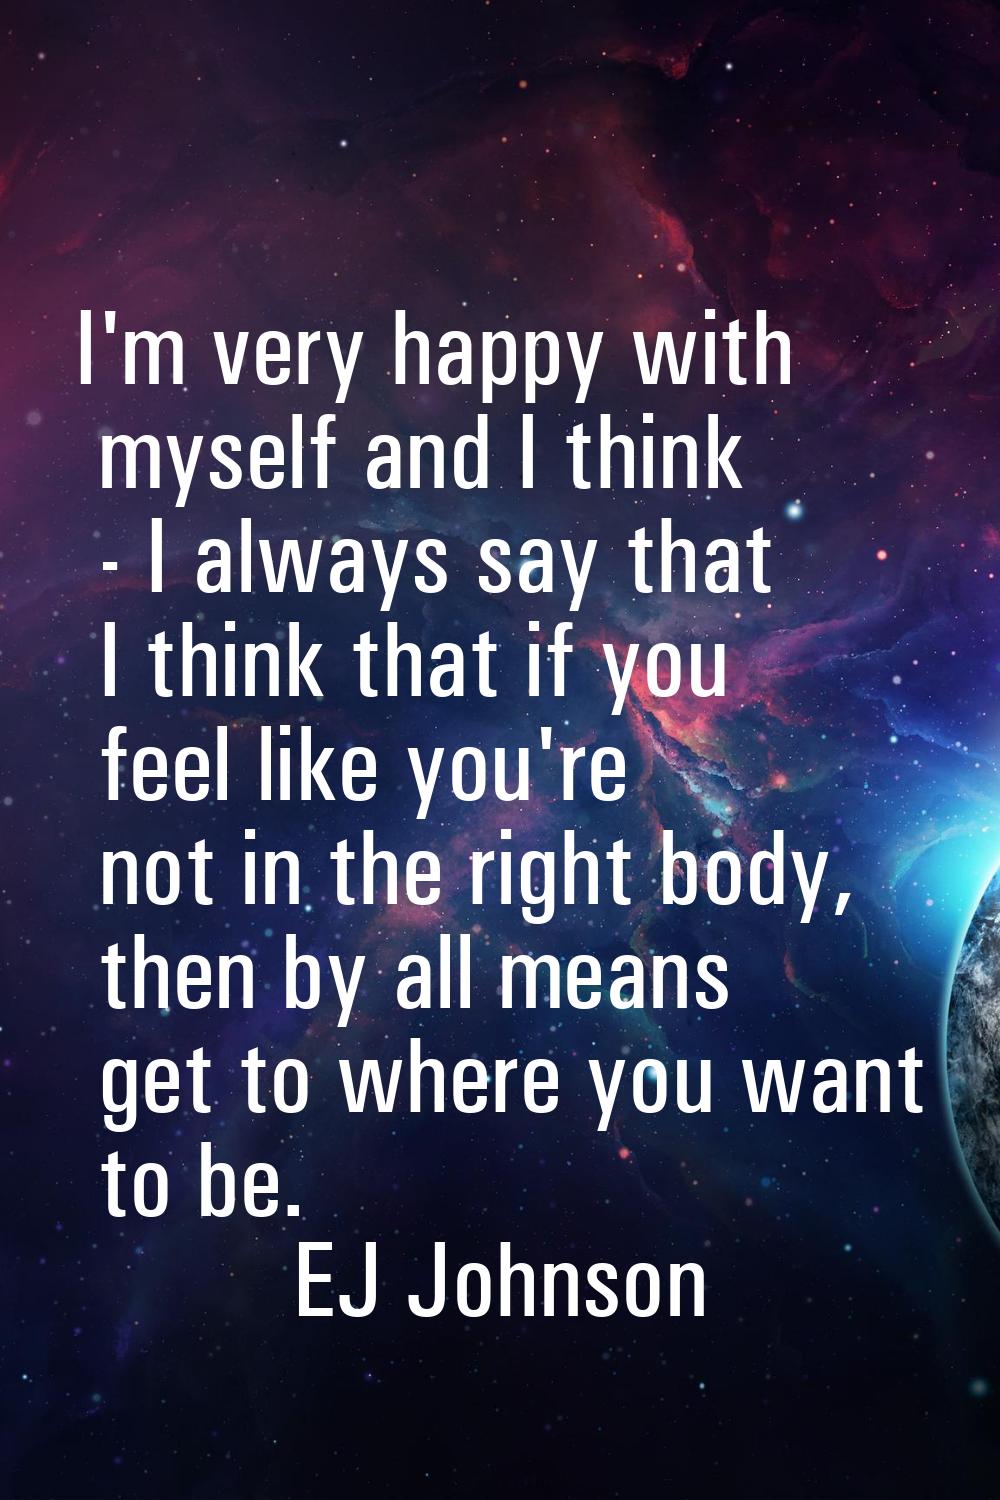 I'm very happy with myself and I think - I always say that I think that if you feel like you're not